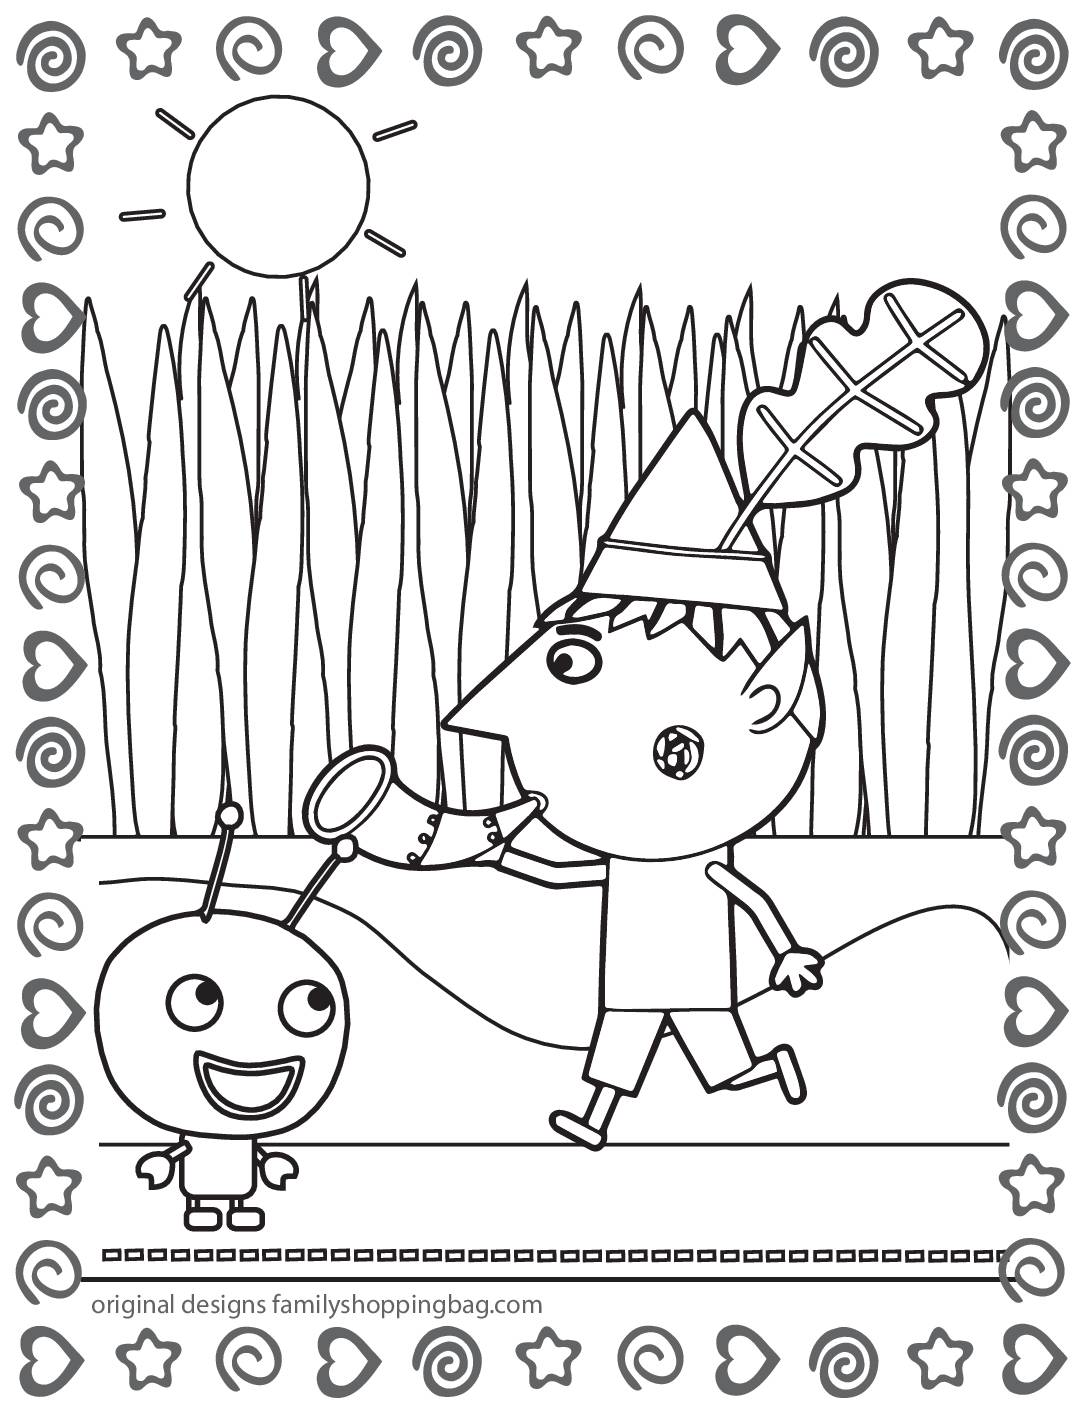 Coloring Page 5 Ben & Holly Coloring Pages